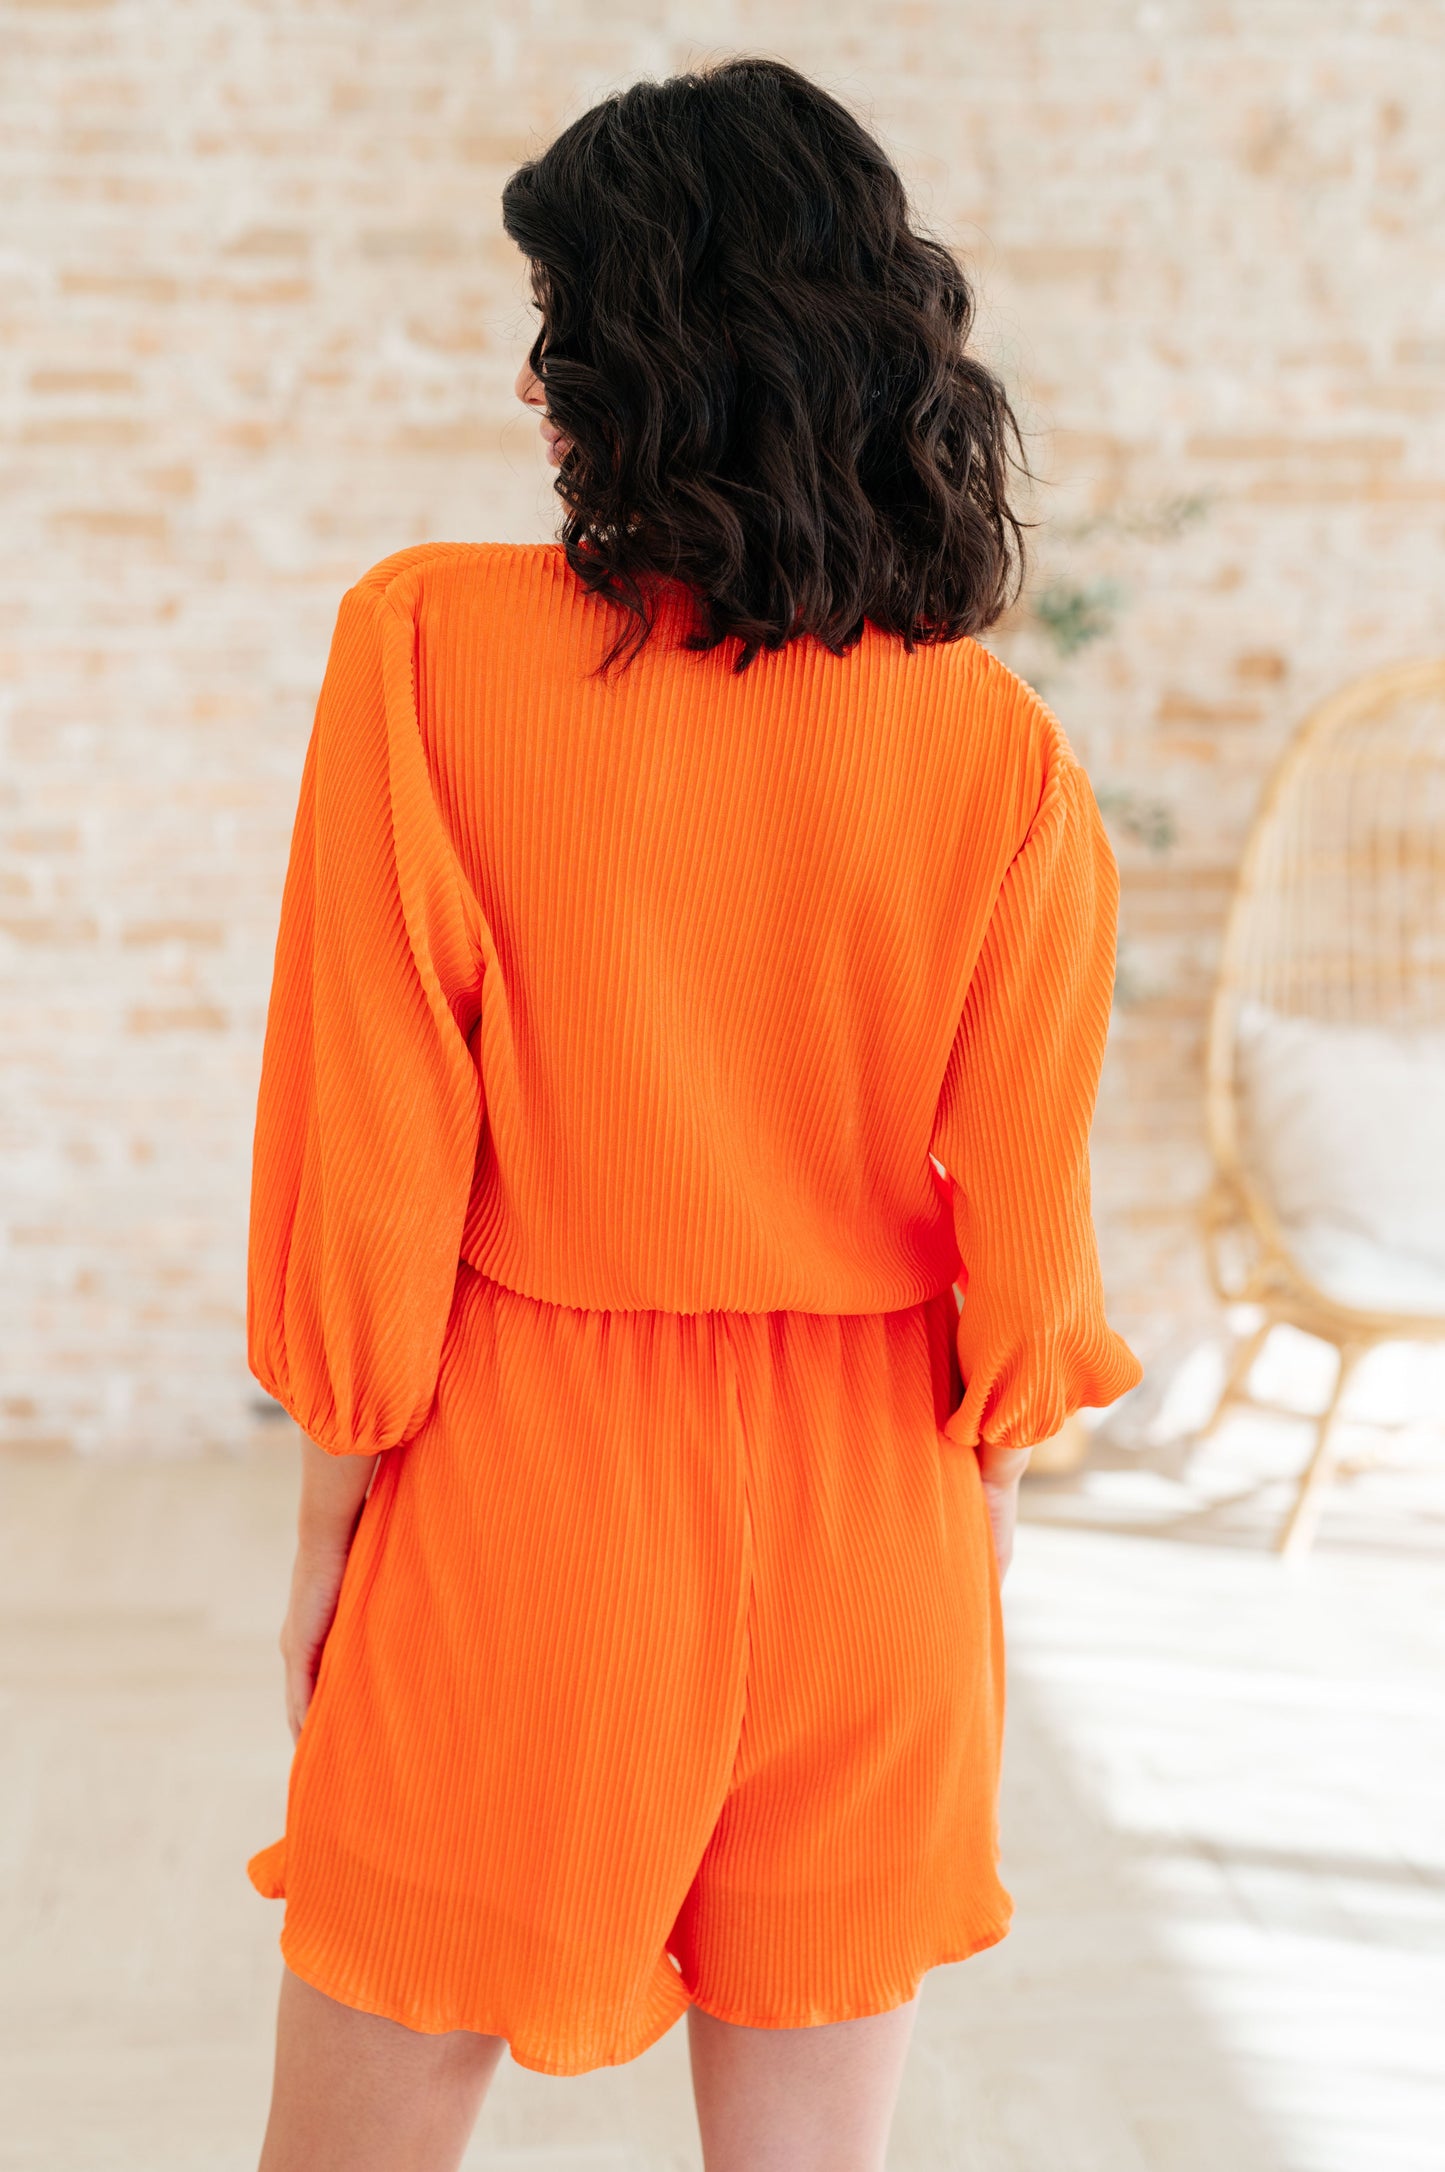 Roll With me Romper in Tangerine - White Birch